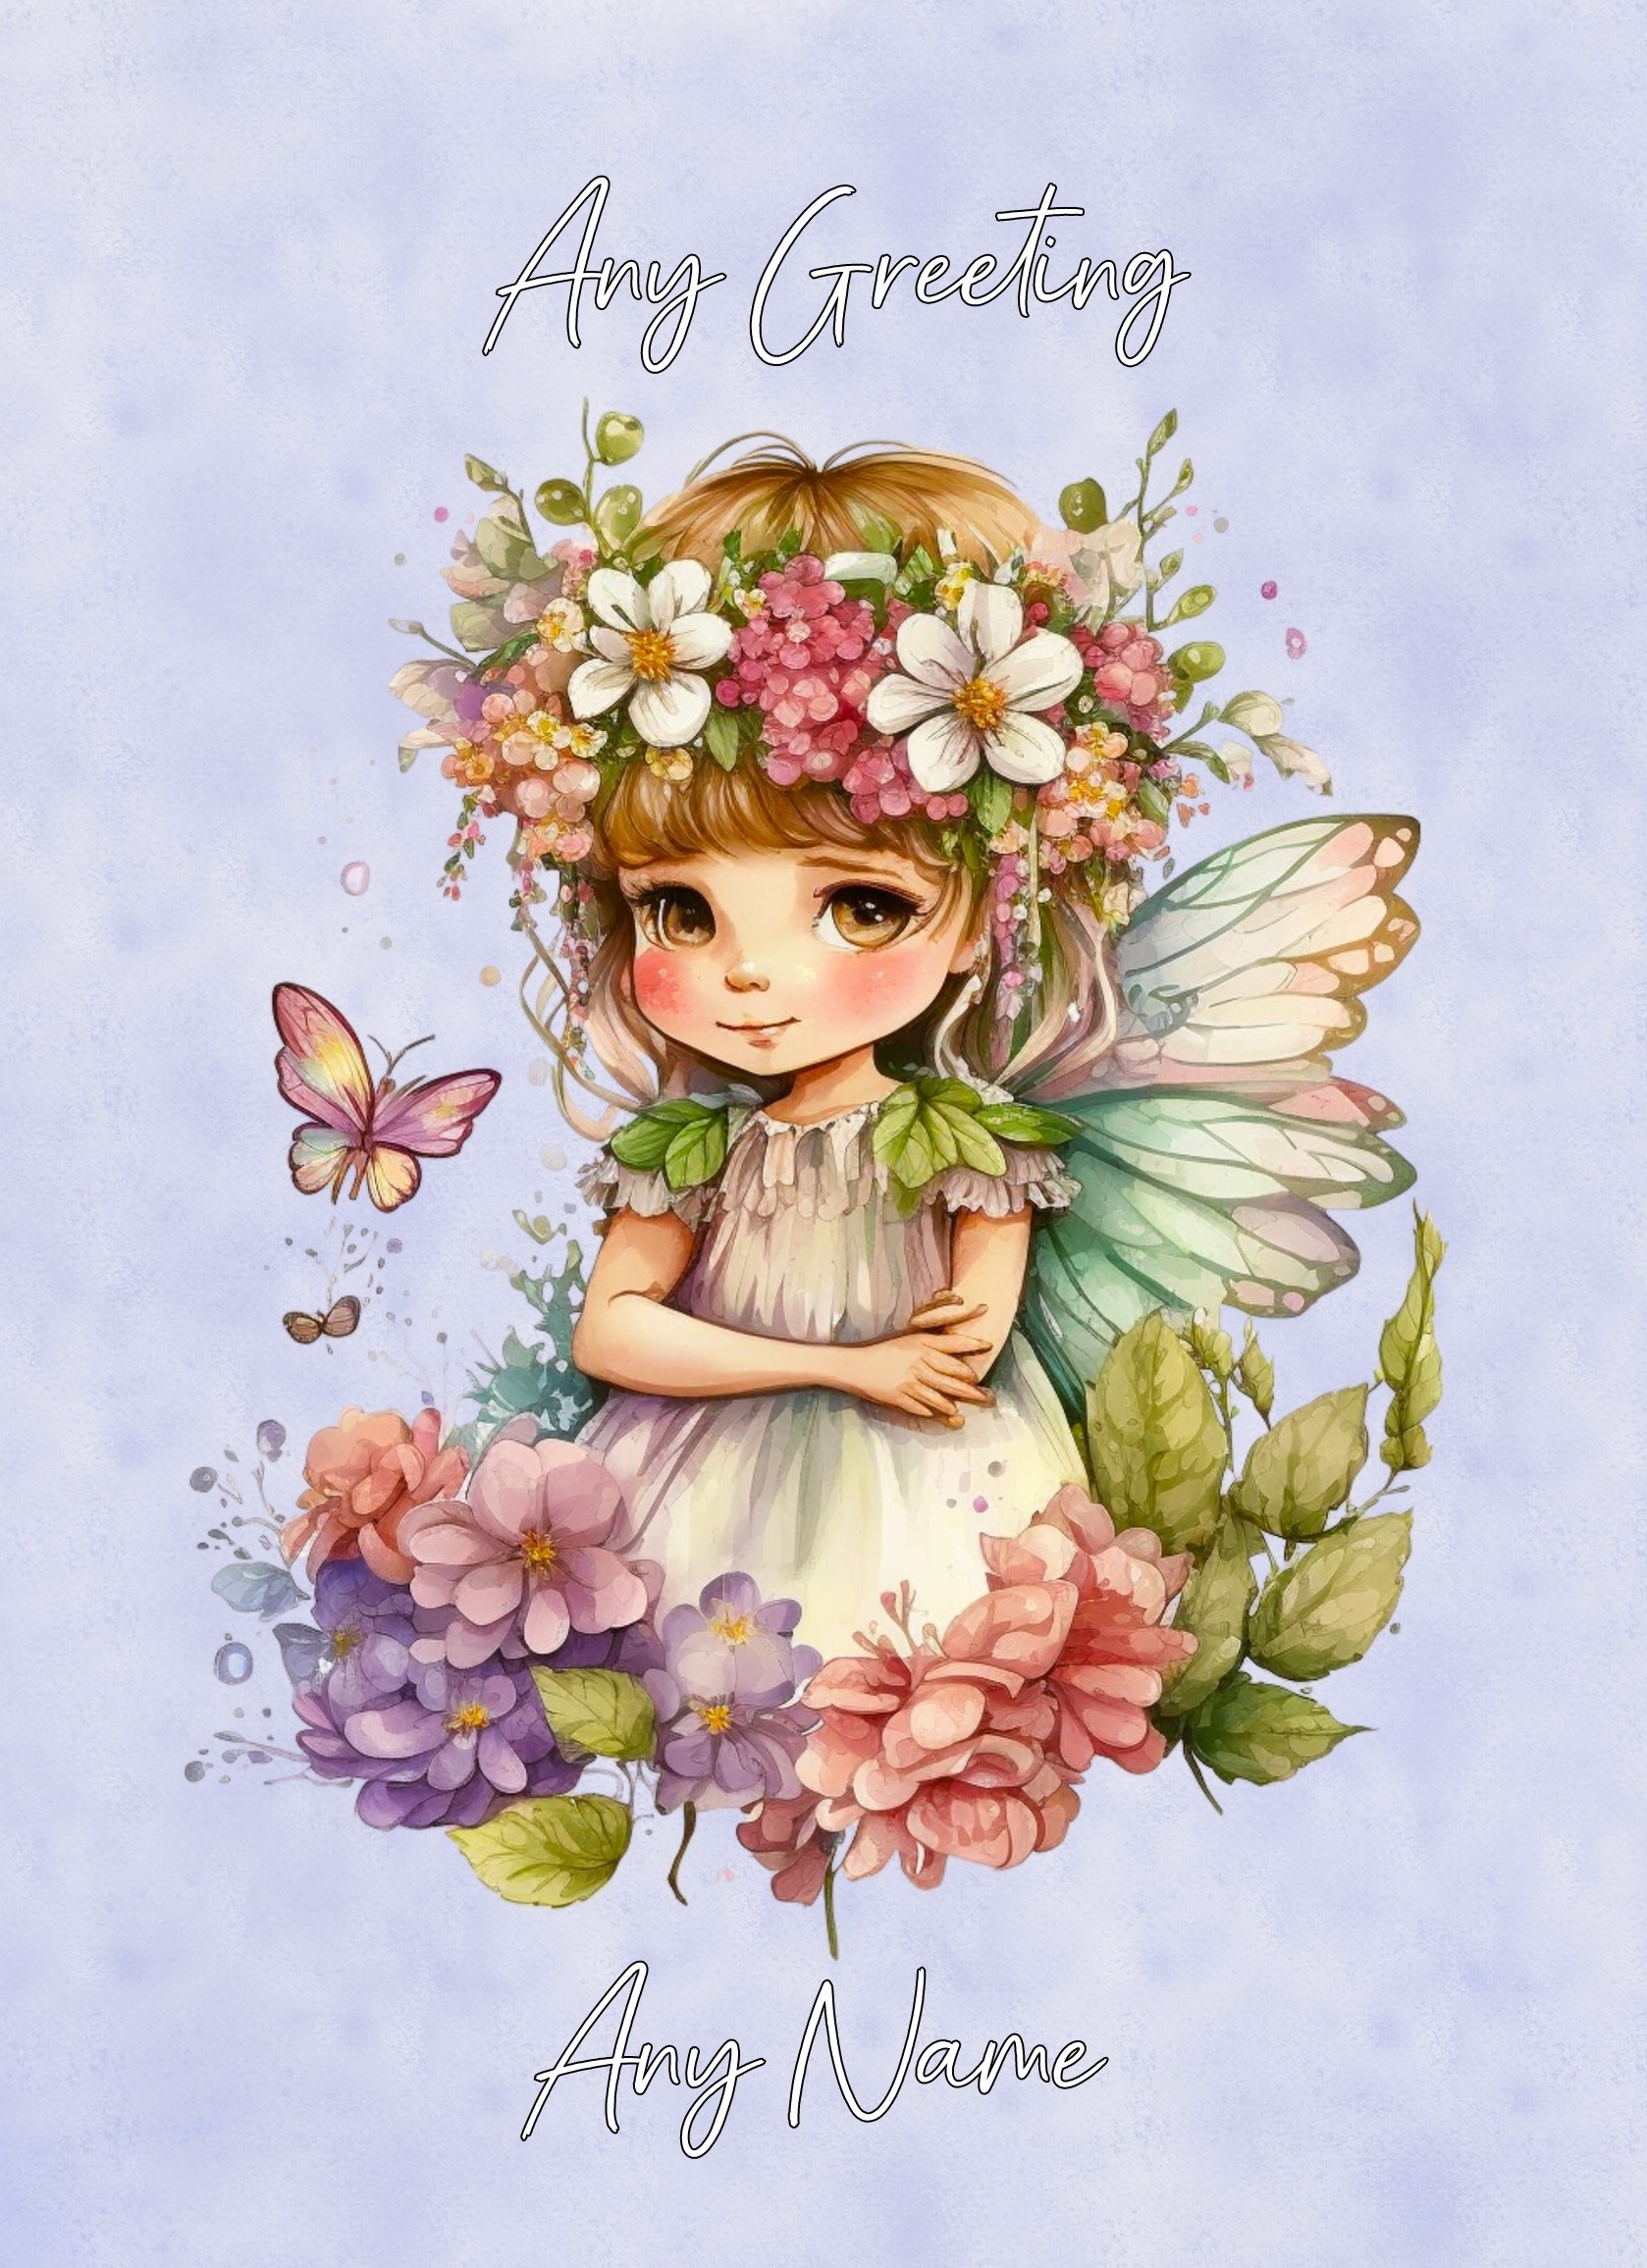 Personalised Fairies Pixies Colourful Art Greeting Card (Birthday, Fathers Day, Any Occasion)